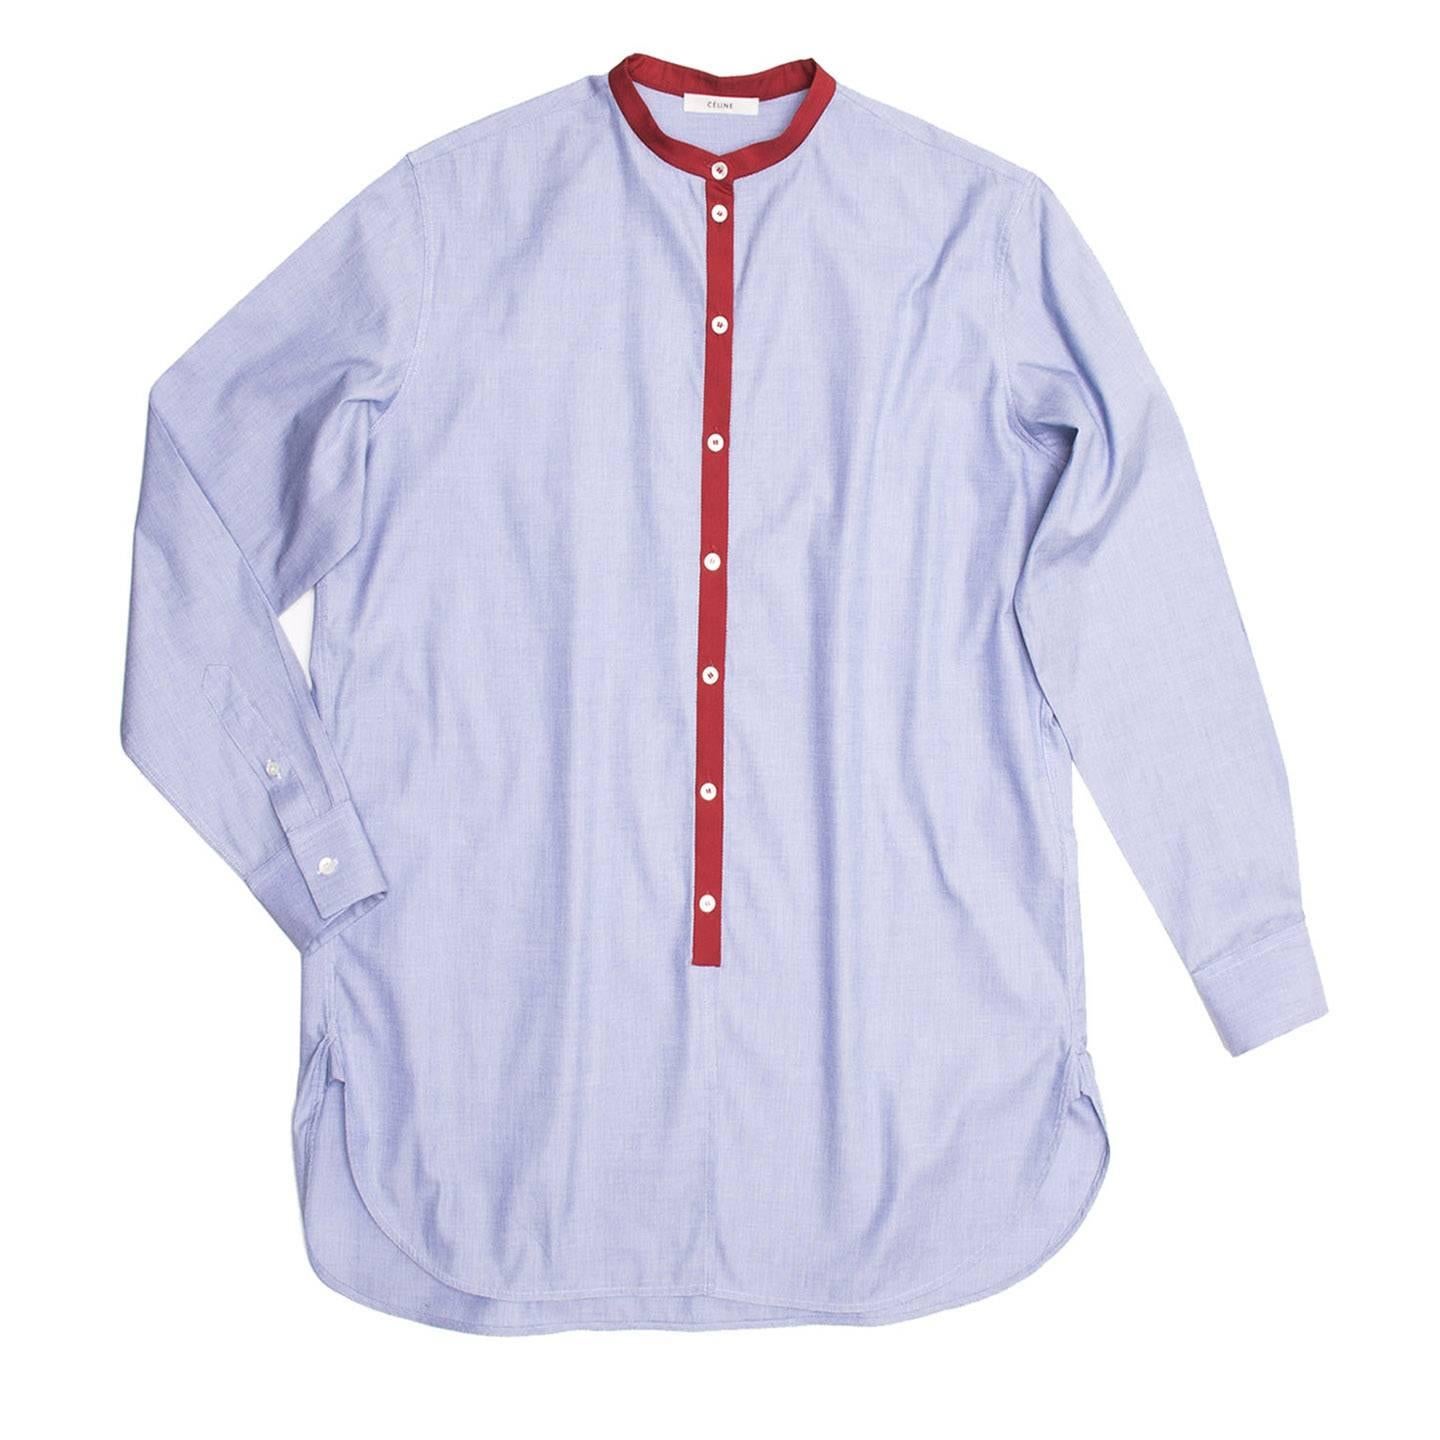 Oxford blue man style shirt with round shaped hem and detailed side vents. Red grosgrain Nehru collar and button placket. White buttons with contrast red thread on central front.

Size  38 French sizing

Condition  Excellent: worn a few times